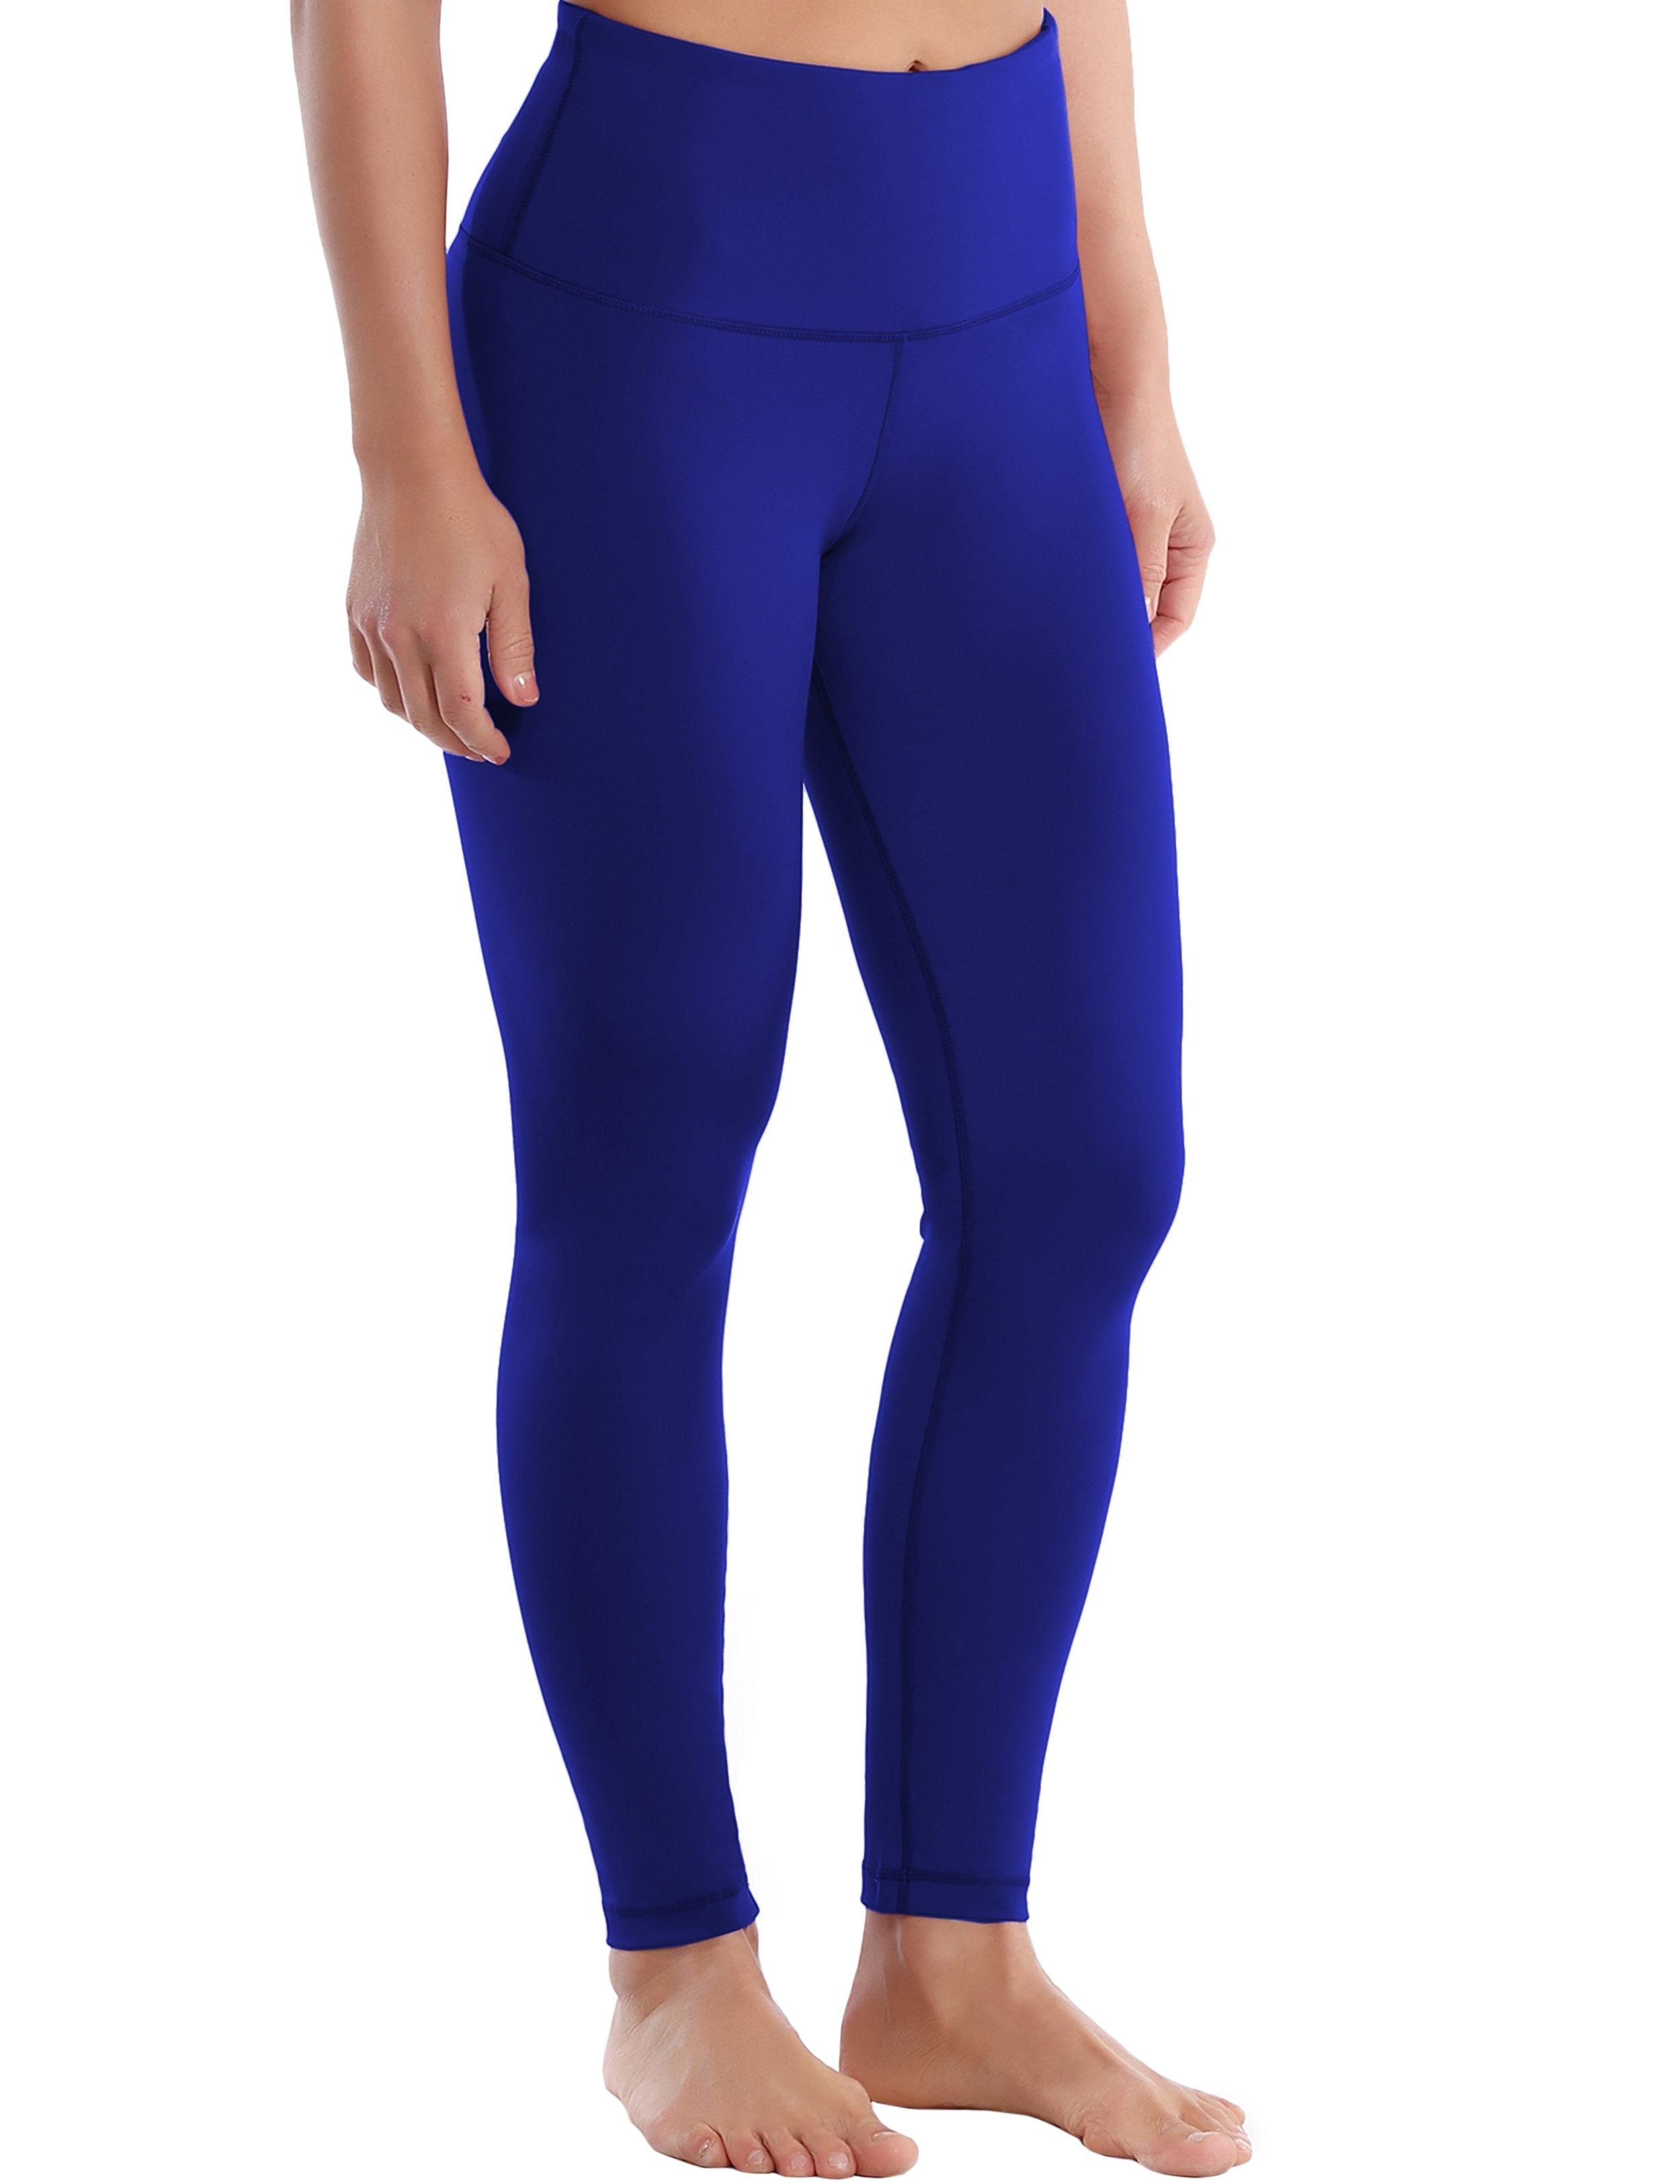 High Waist Yoga Pants navy 75%Nylon/25%Spandex Fabric doesn't attract lint easily 4-way stretch No see-through Moisture-wicking Tummy control Inner pocket Four lengths